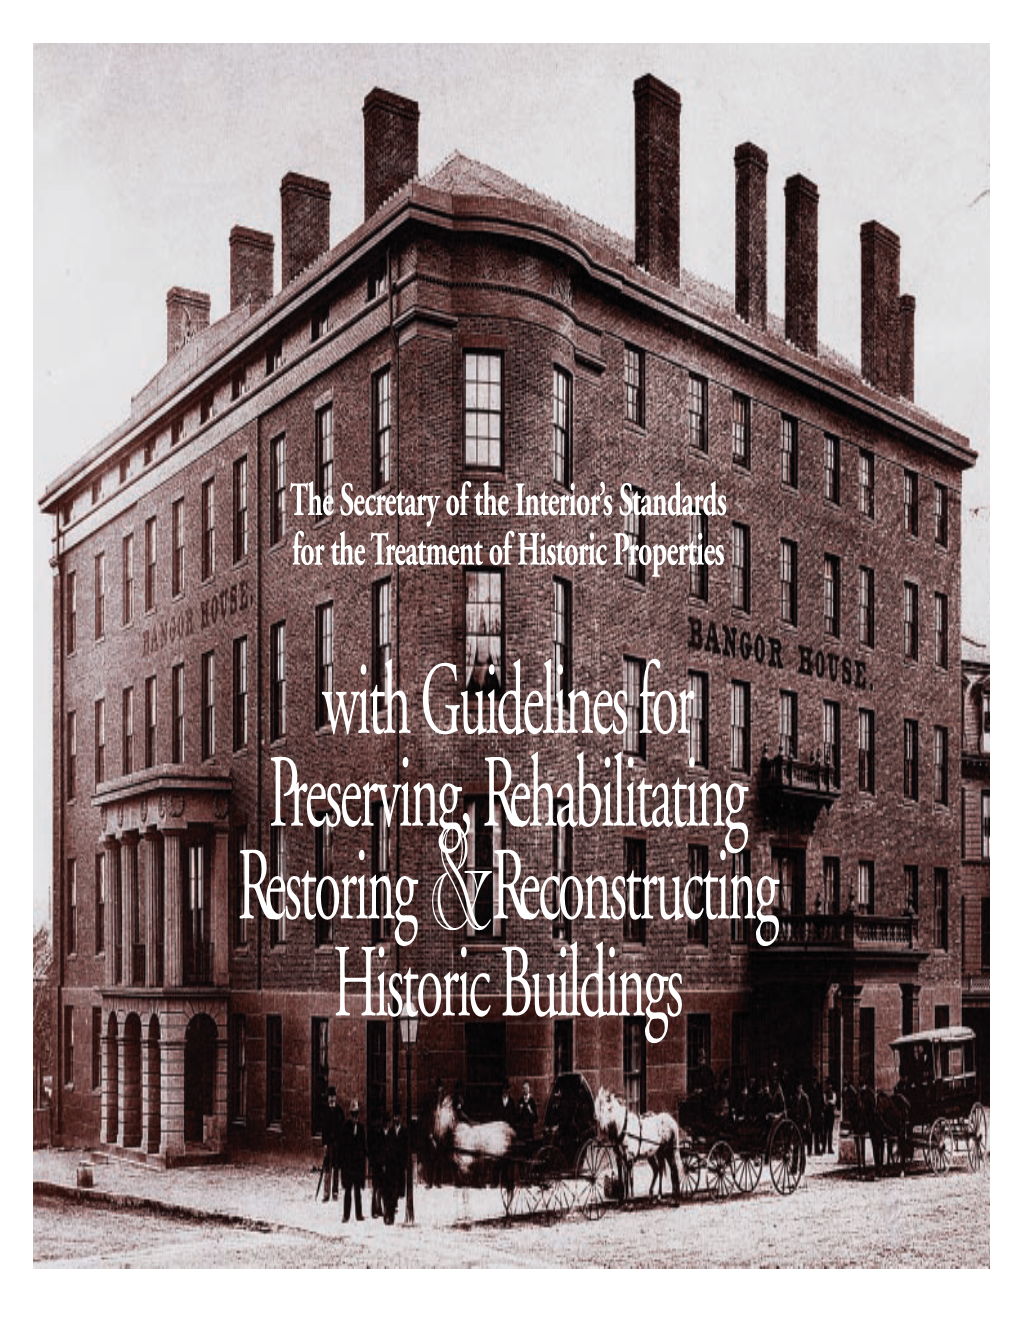 With Guidelines for Preserving, Rehabilitating Restoring &Reconstructing Historic Buildings